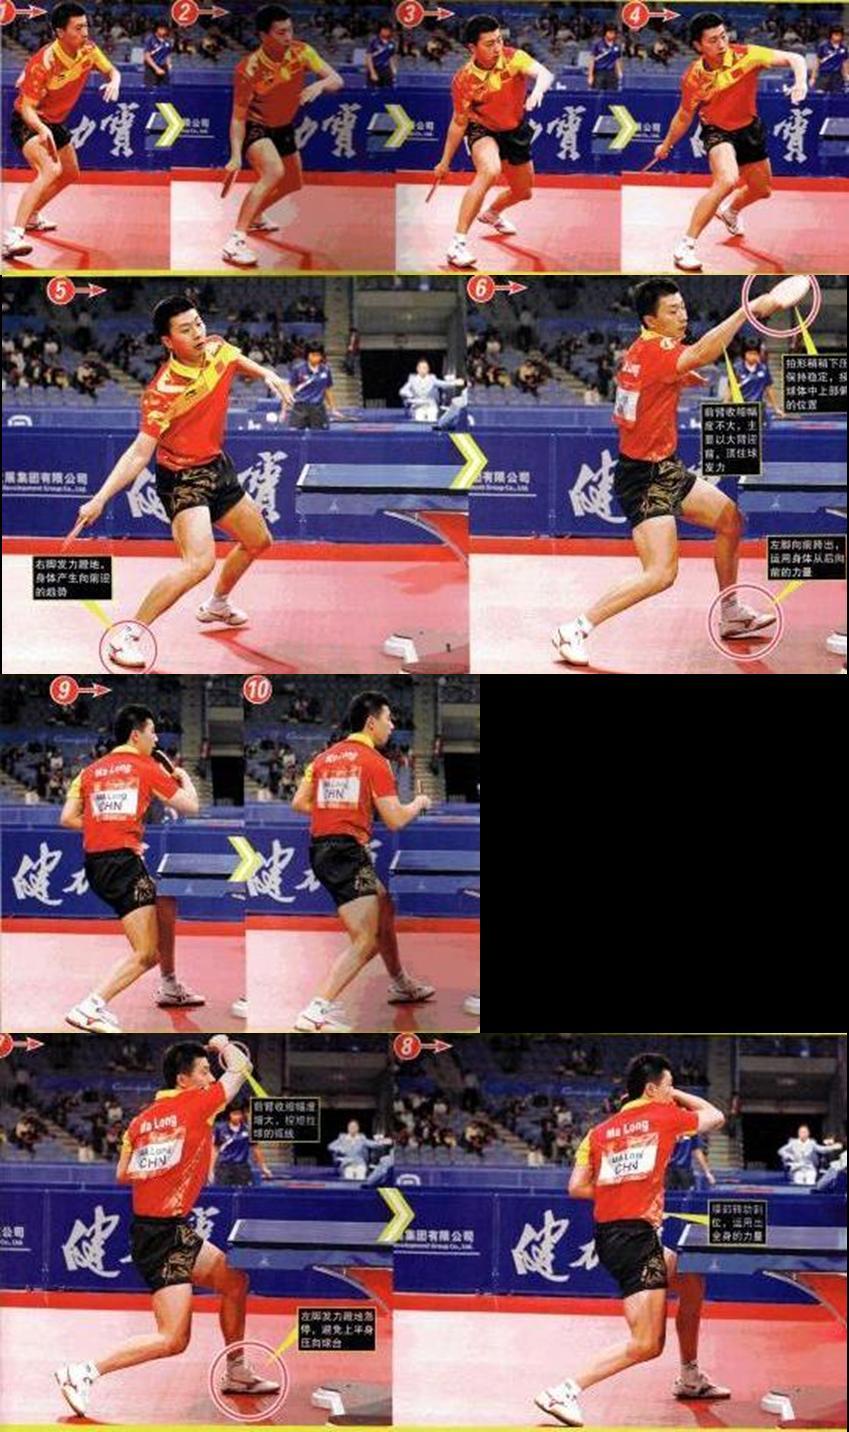 Ma Long's forehand Power Looping Backspin Power looping backspin is the most common attacking method, and it is one of the most powerful forehand techniques.